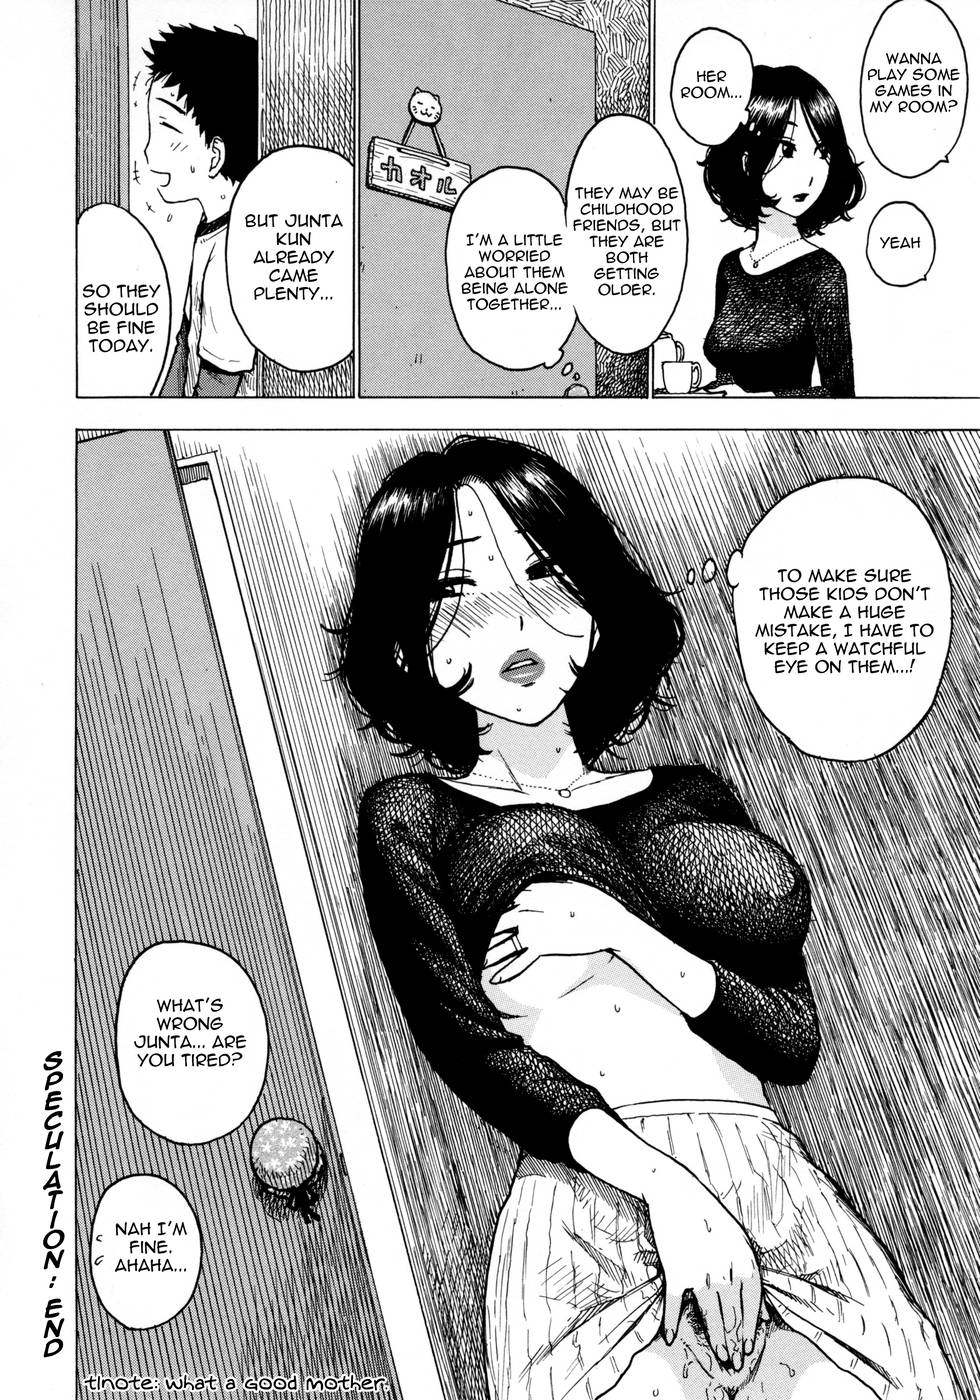 Hentai Manga Comic-Hitozuma-Chapter 4-Turn Out Just As One Immoral Wished-16